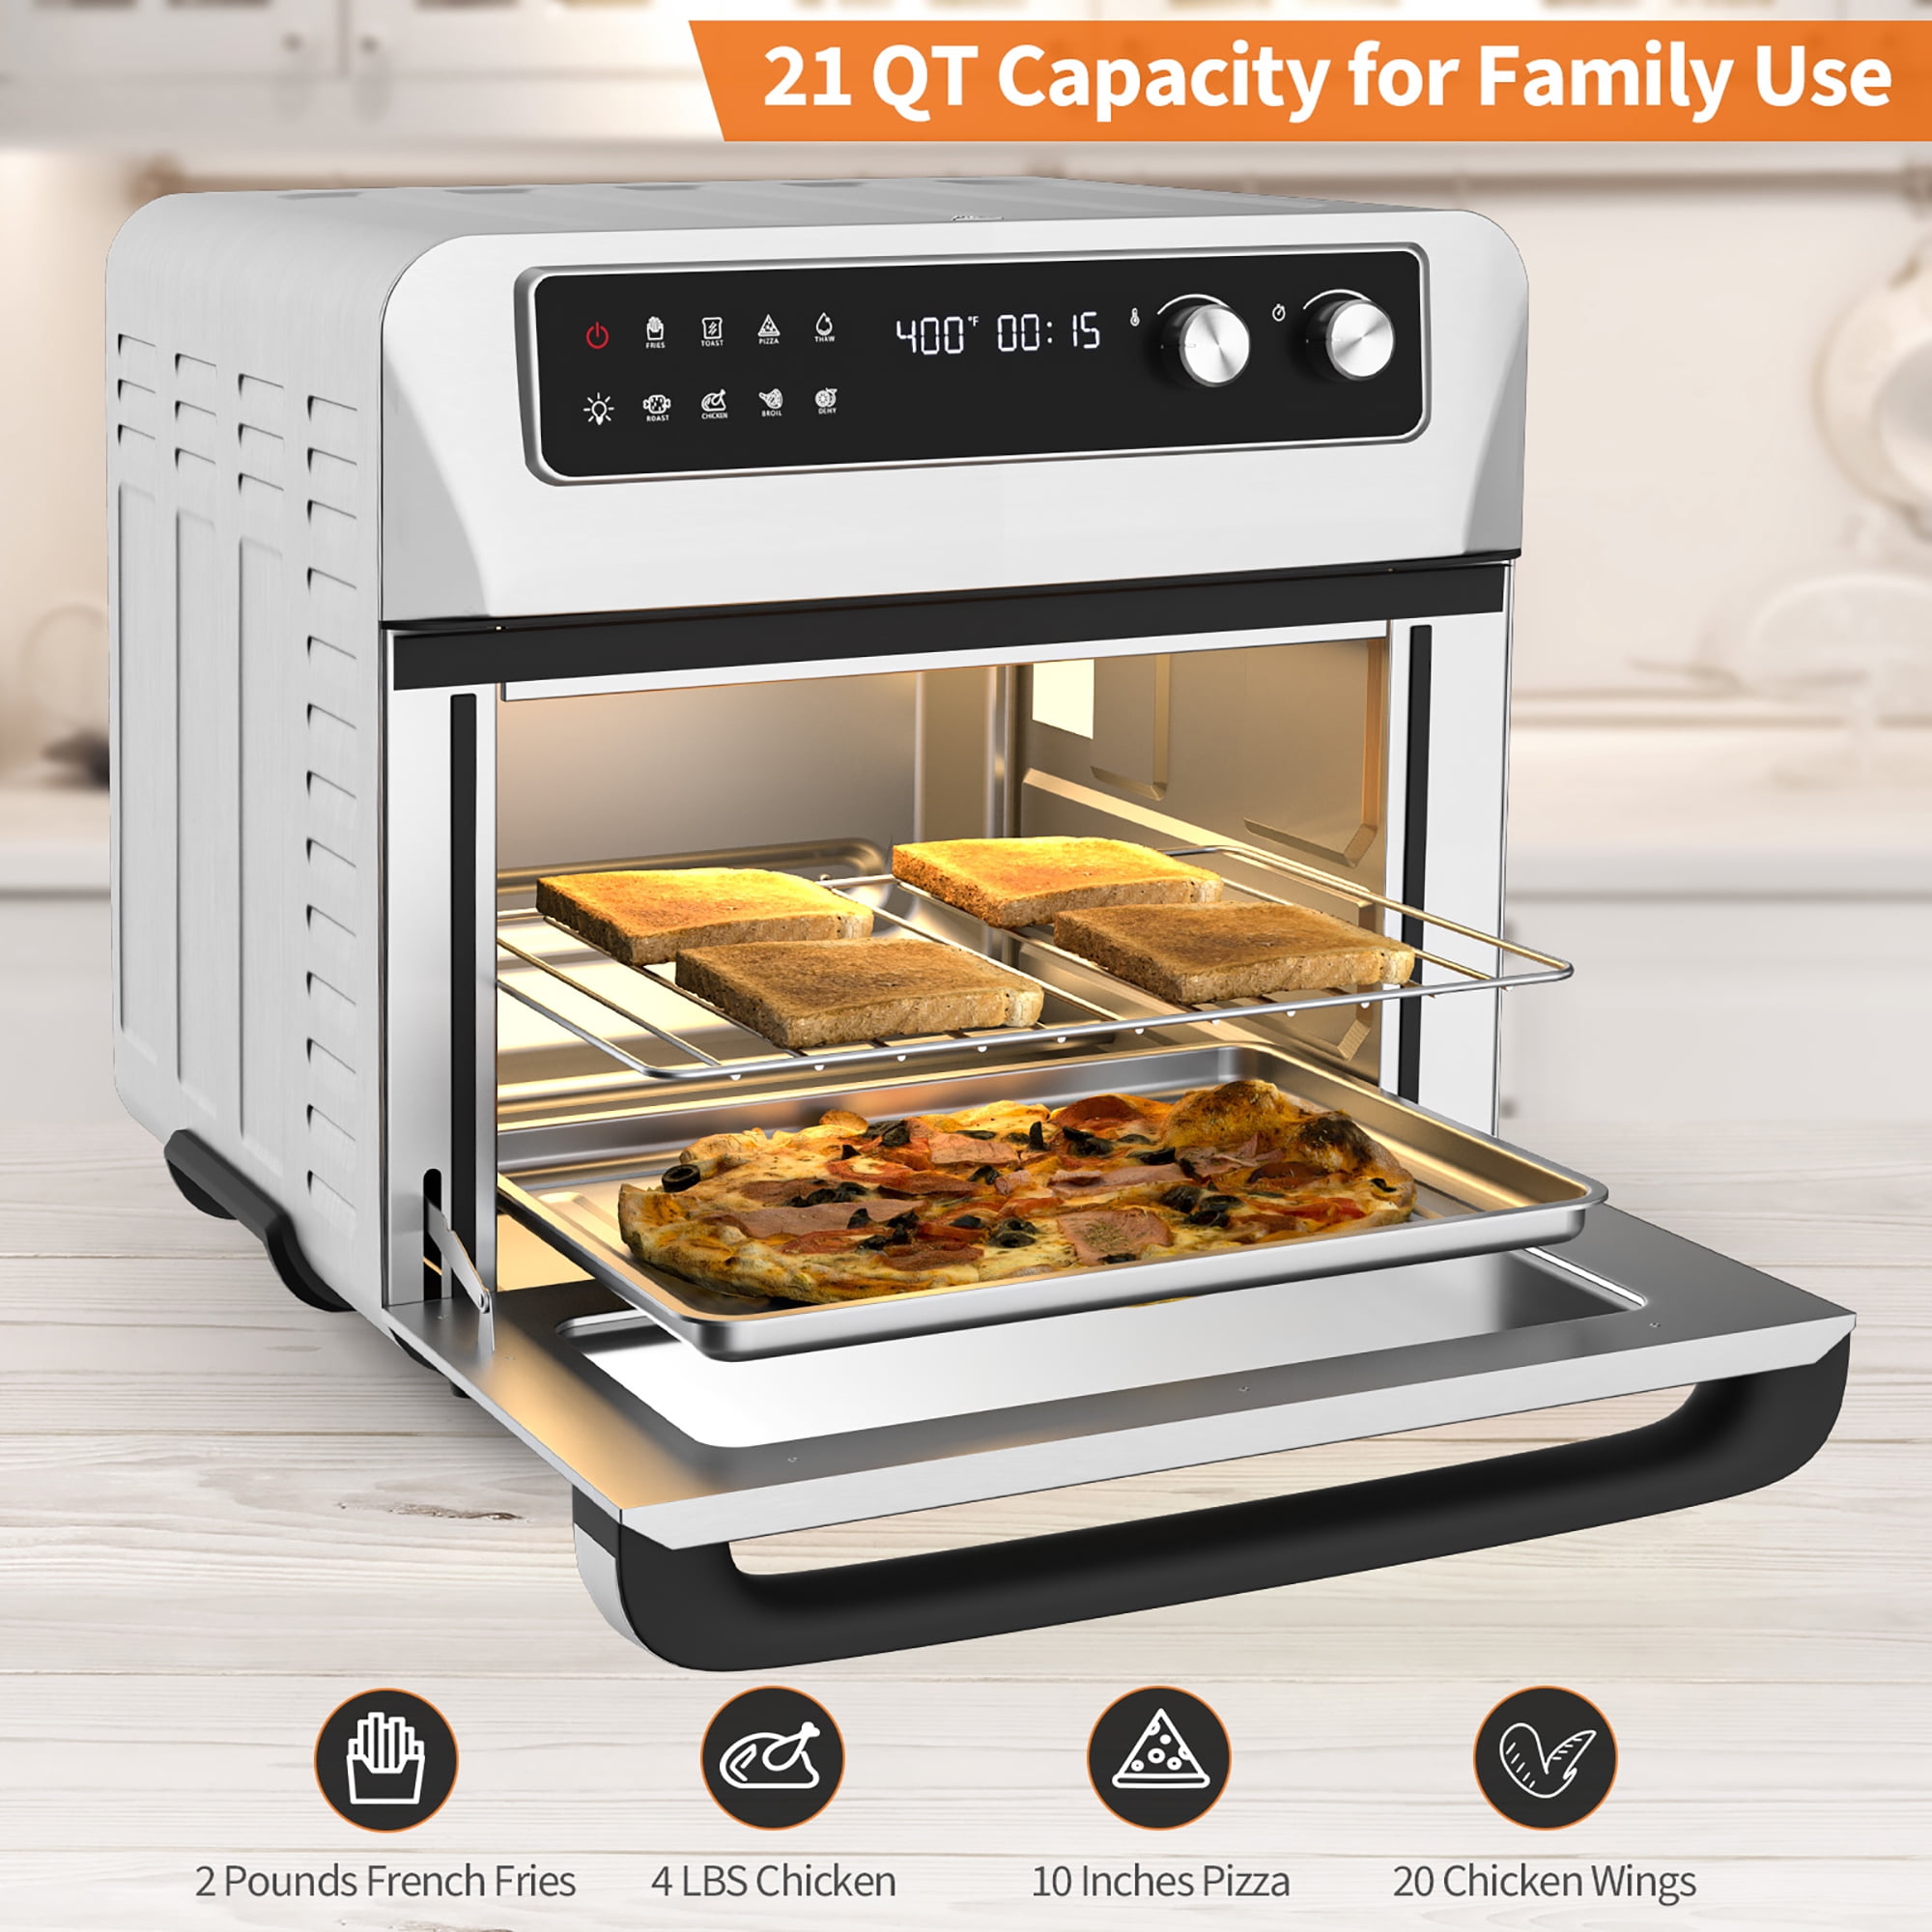  COSTWAY Air Fryer Toaster Oven, 7-in-1 Convection Countertop  Oven with Auto-Shut-Off, Timer, Accessories & Cookbook, 1800W, 21.5 QT Air  Fryer Toaster Oven Combo, Bake, Broil, Toast, Reheat, Fry Oil-Free,  Stainless Steel 